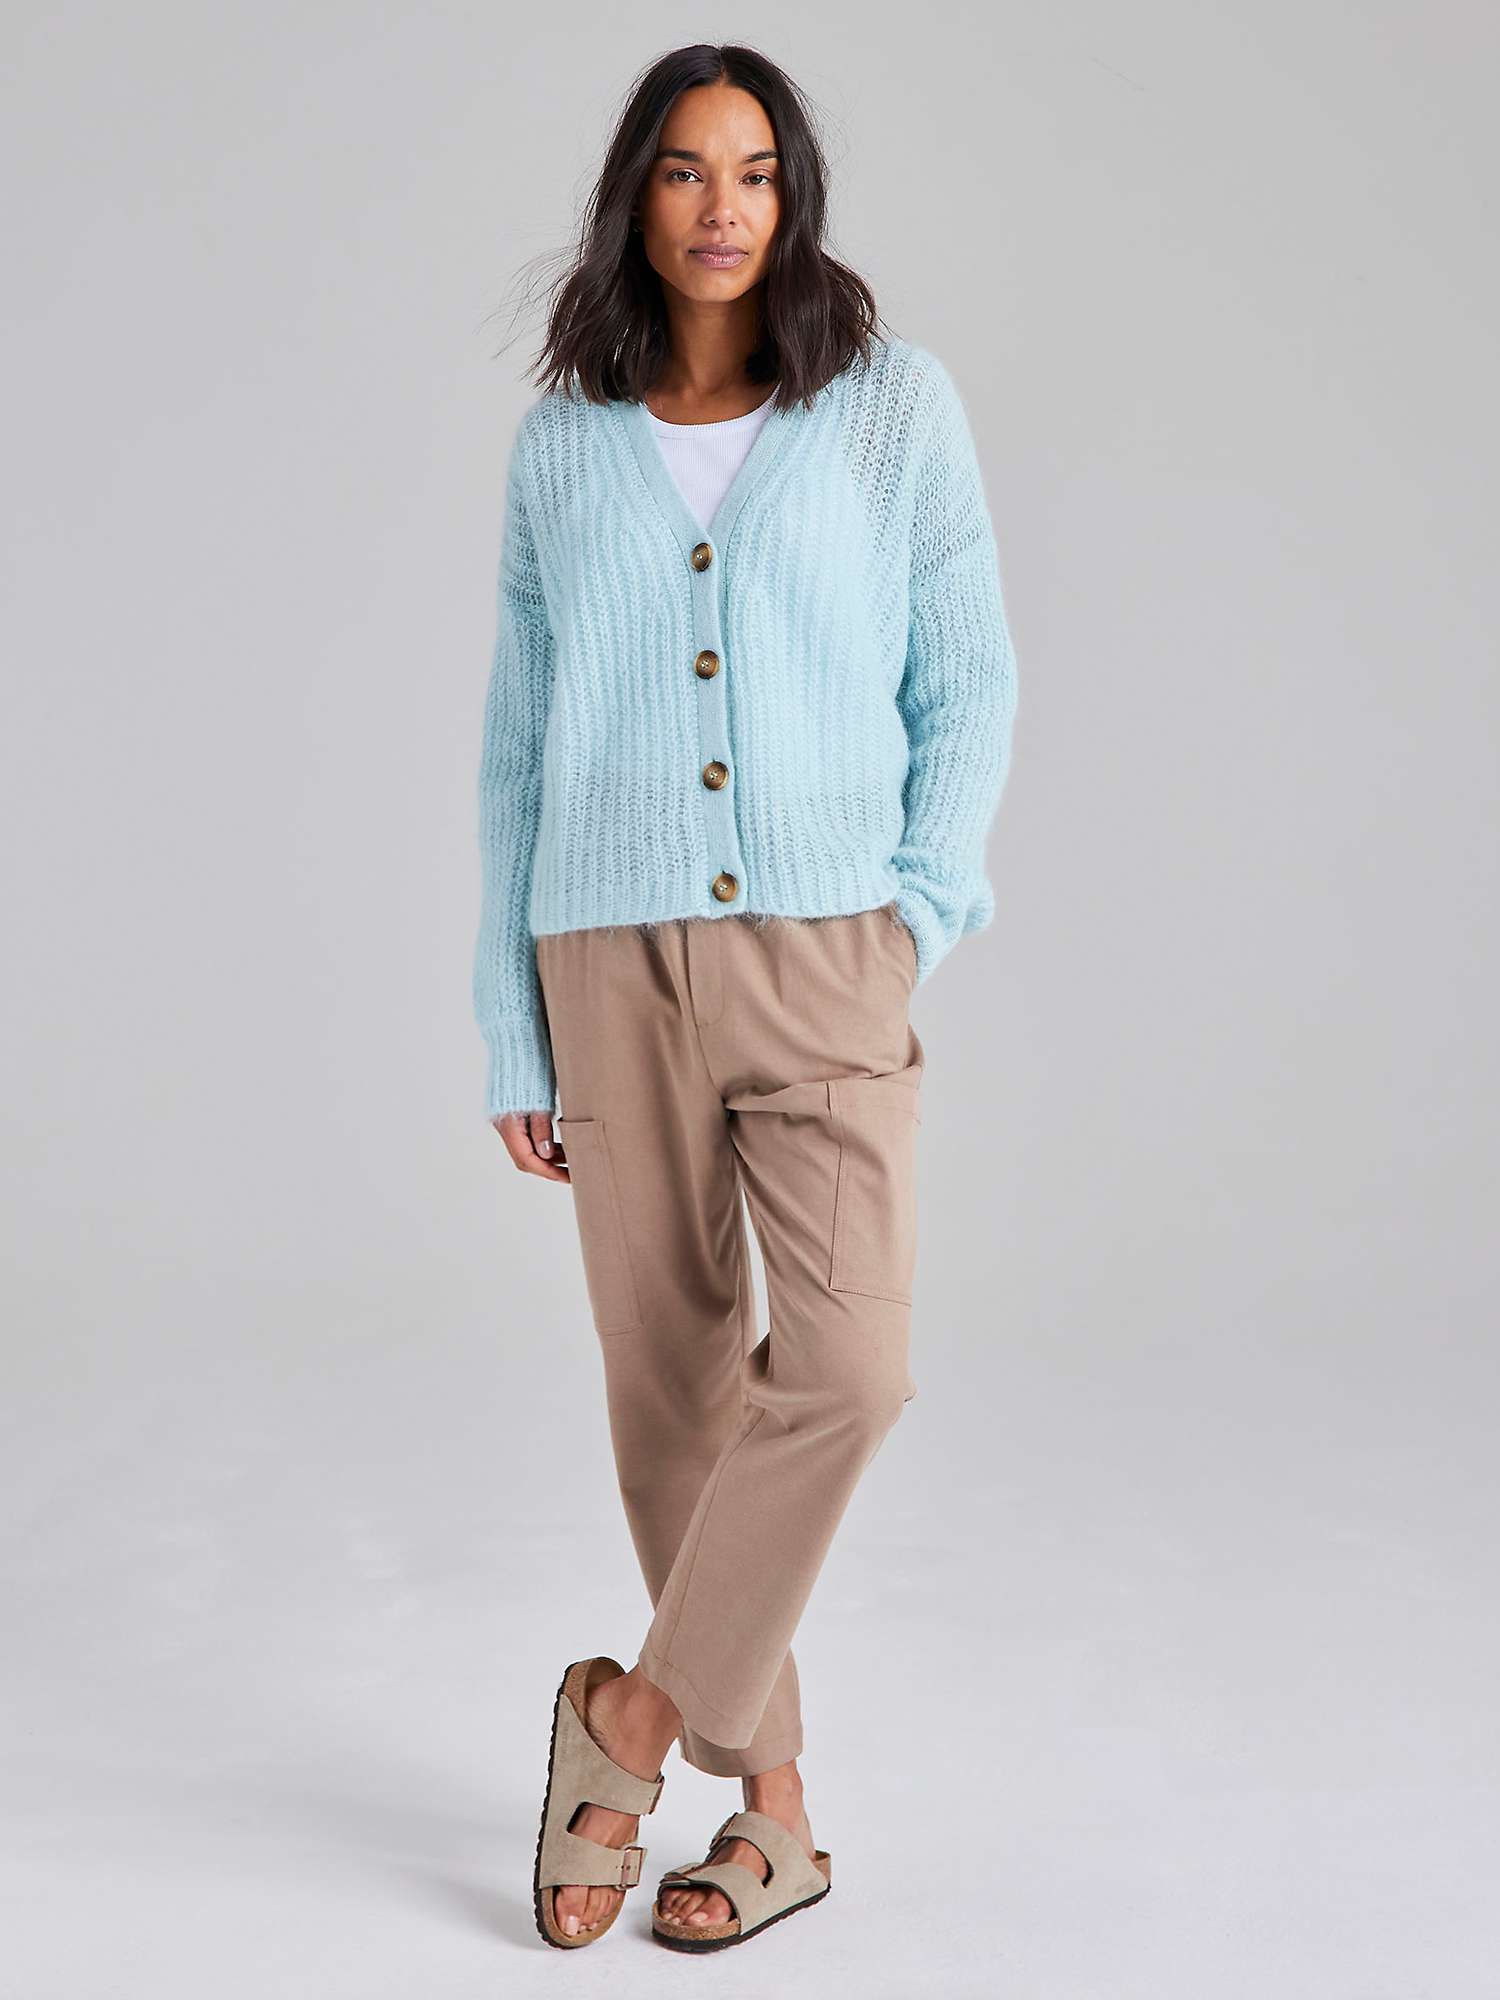 Buy Cape Cove Eva Tapered Leg Trousers, Stone Online at johnlewis.com